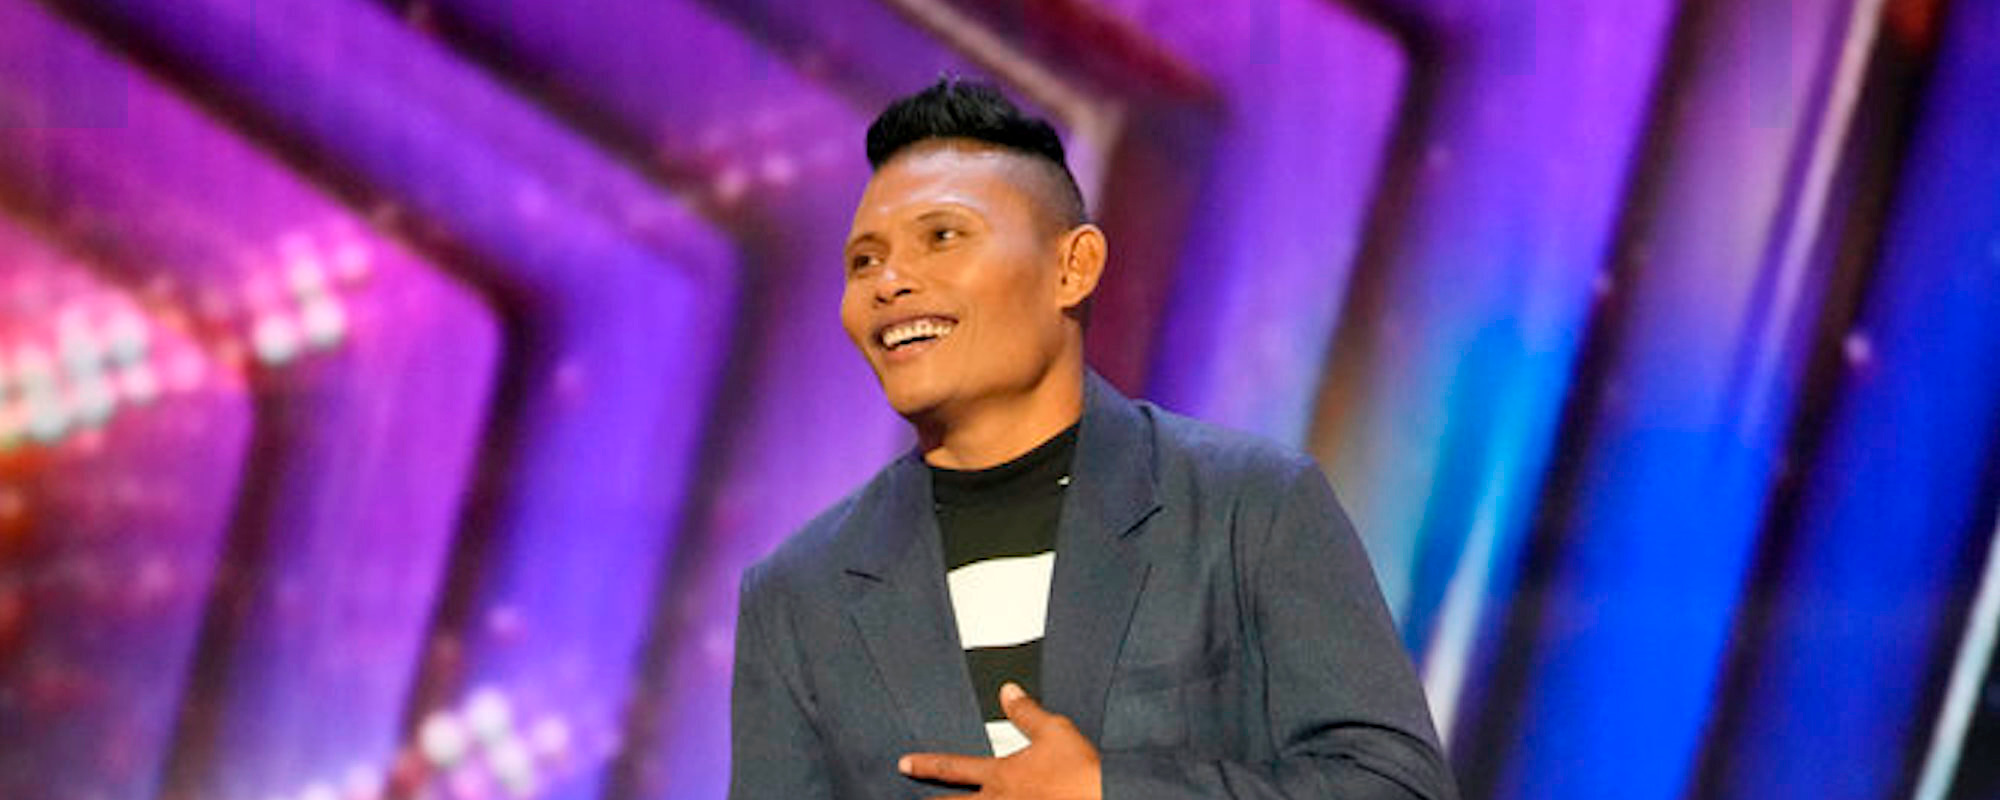 Roland Abante Transcends With Soulful Audition on ‘America’s Got Talent’